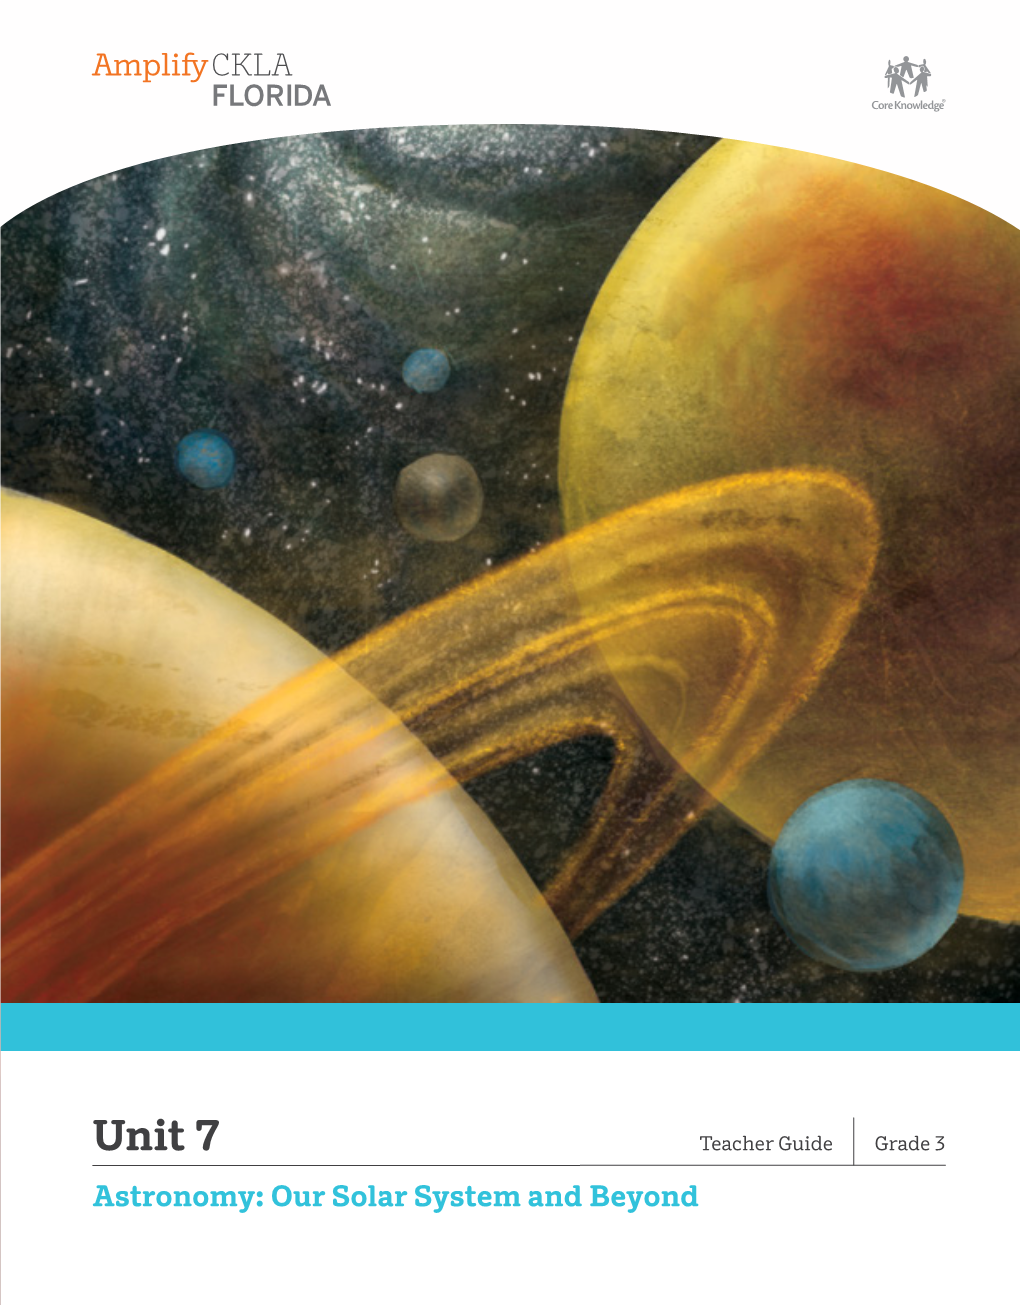 Unit 7 Teacher Guide Grade 3 Astronomy: Our Solar System and Beyond Grade 3 Unit 7 Astronomy : Our Solar System and Beyond